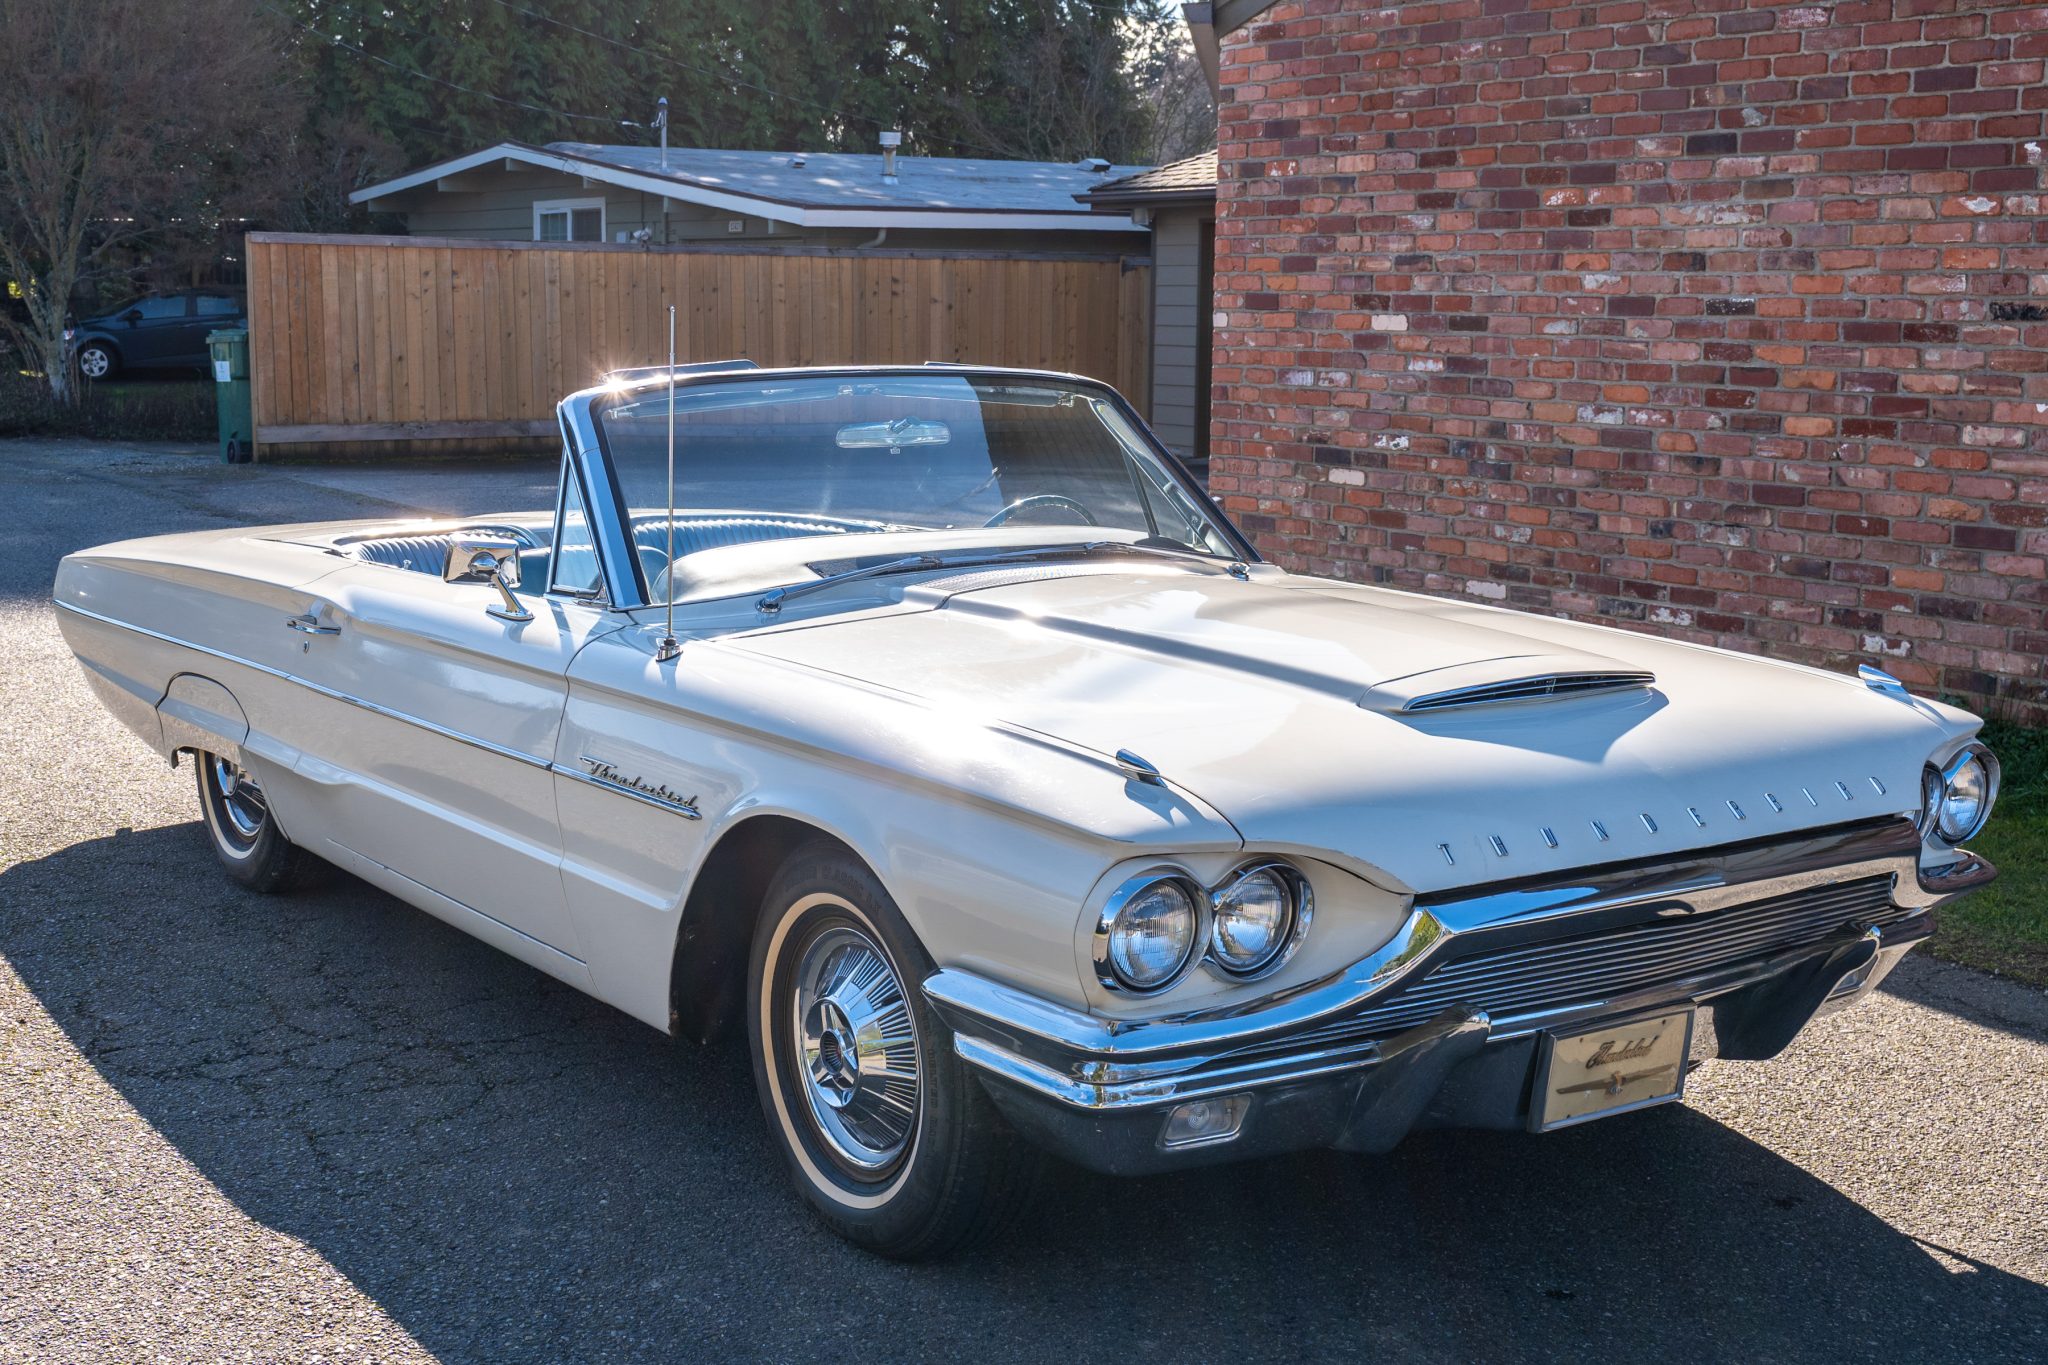 Used 1964 Ford Thunderbird Convertible Review